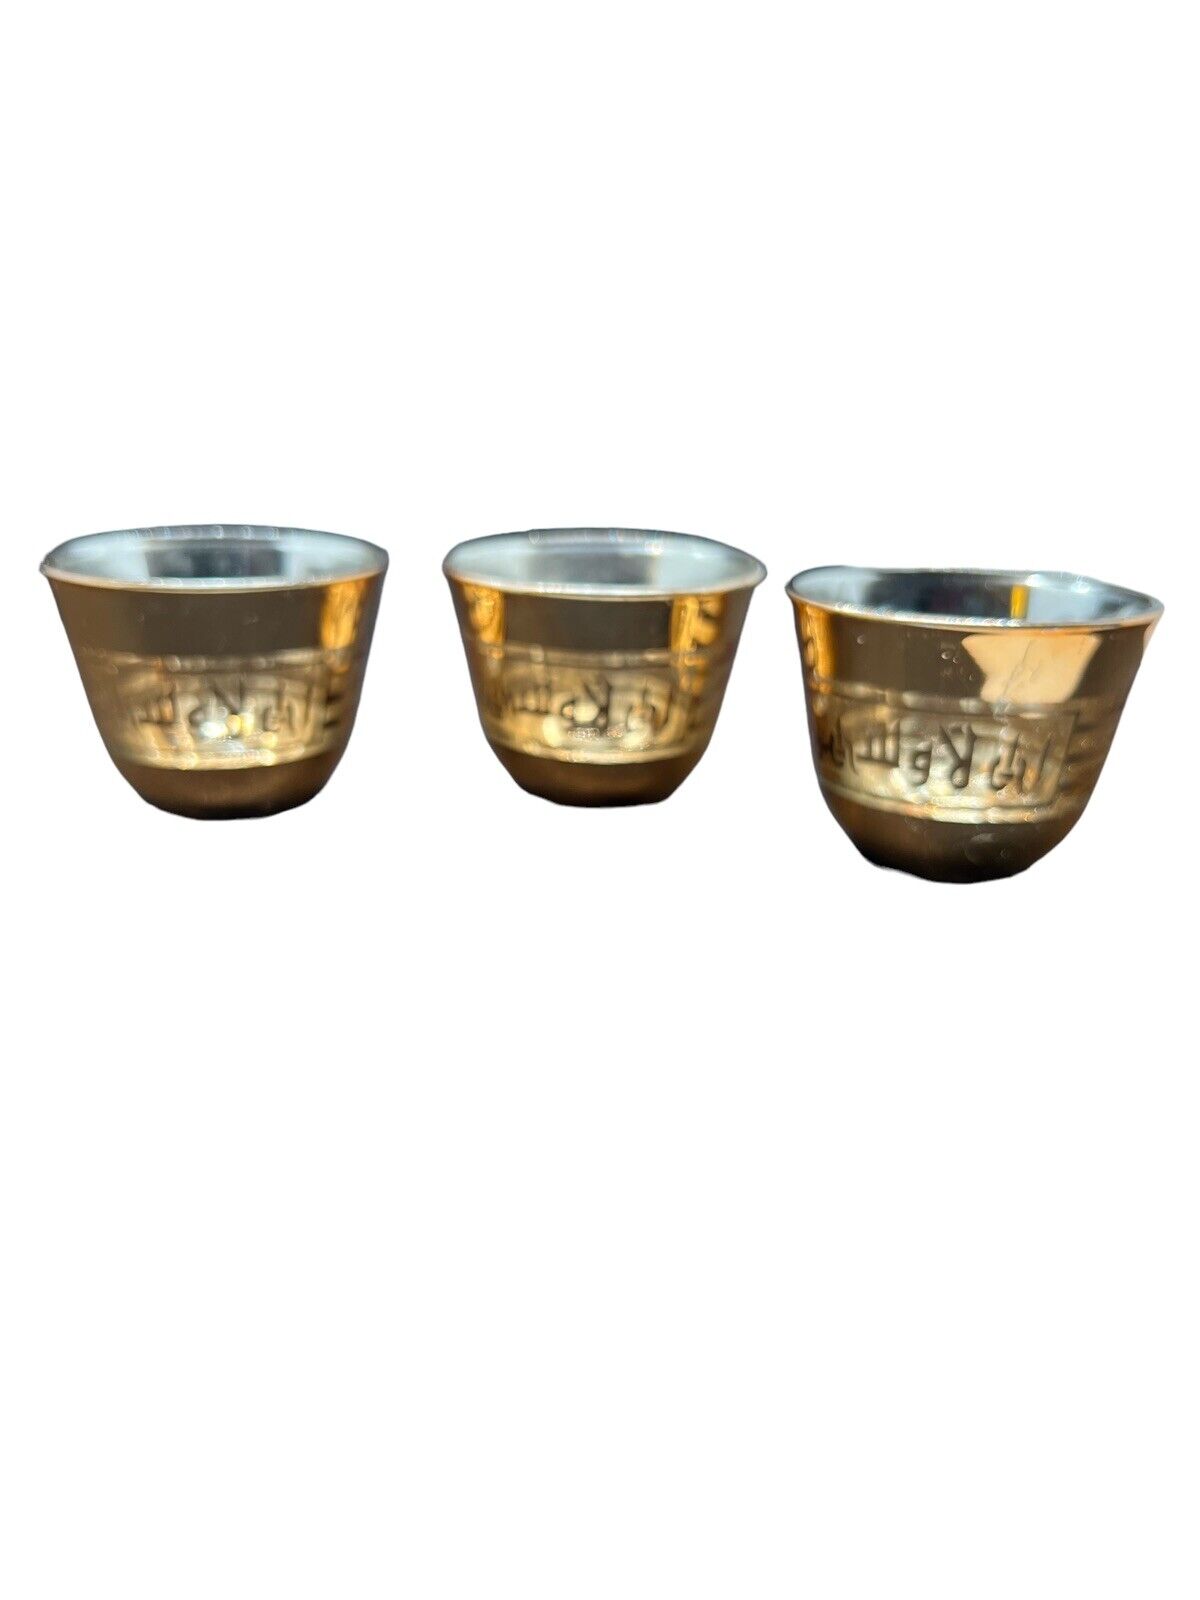 3 - Arabic/Moroccan Style Glasses with Gold Overlay For Tea Or Liquor